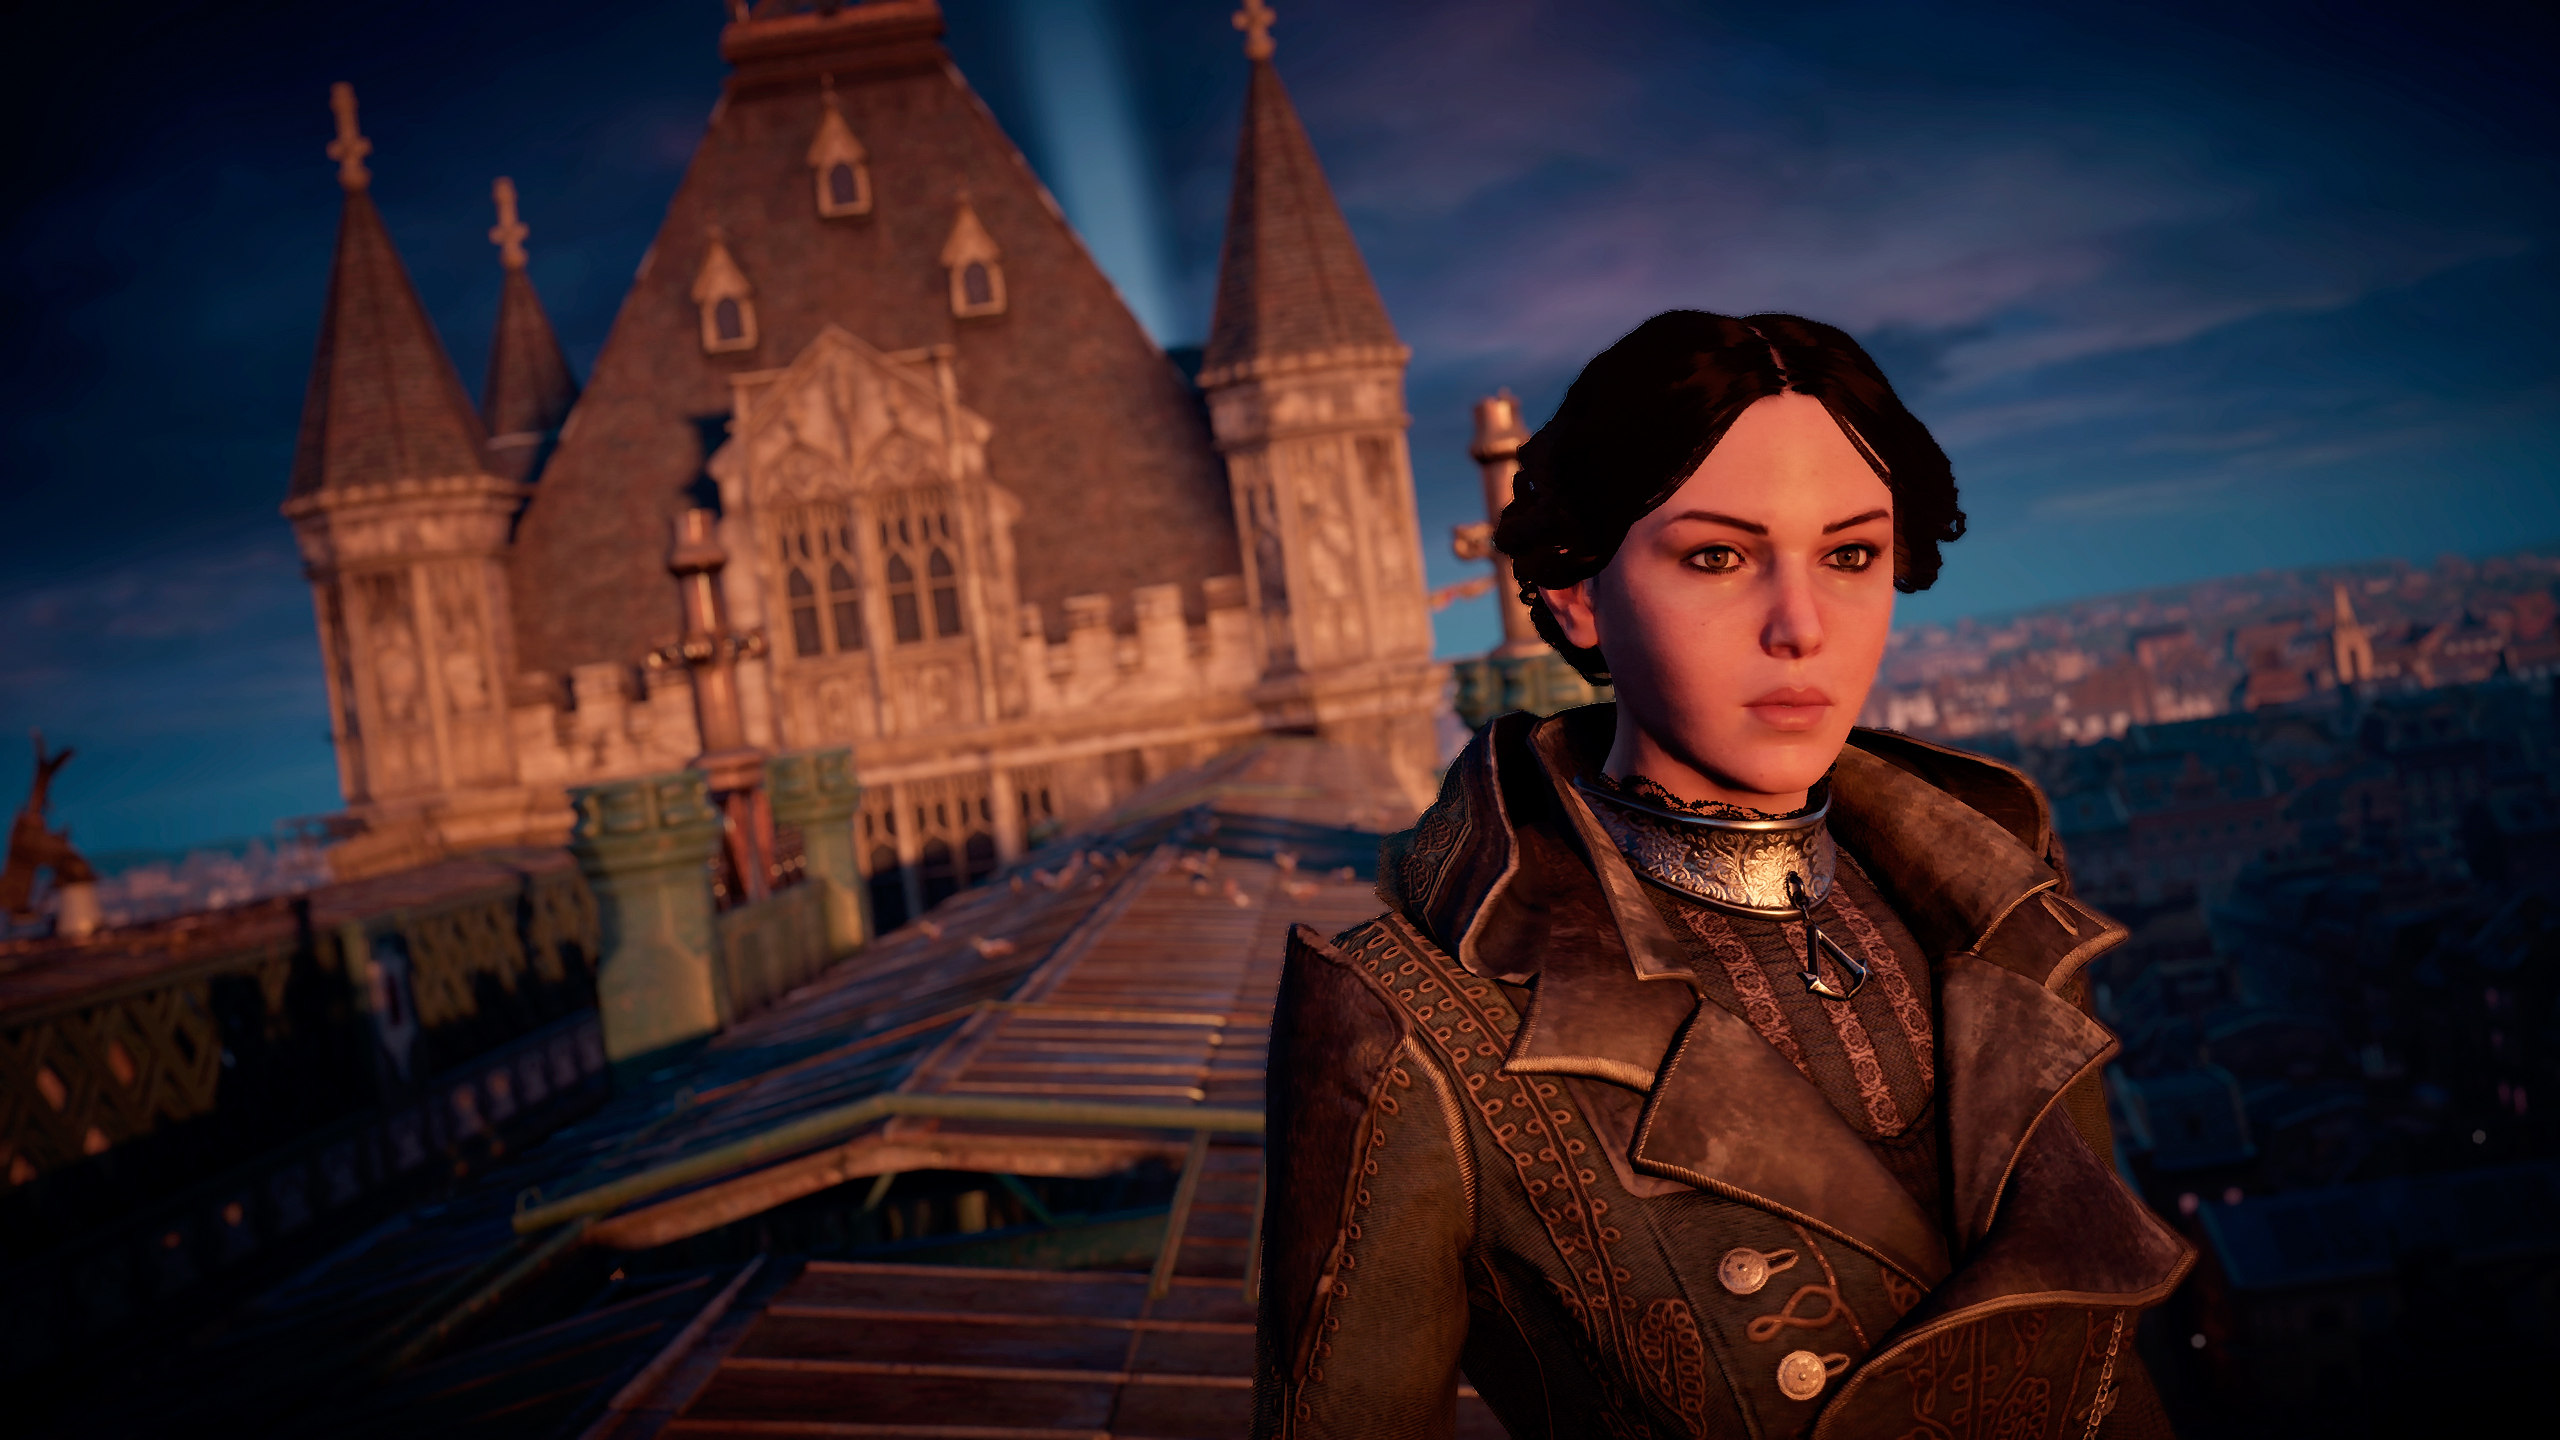 General 2560x1440 Assassin's Creed Lydia Frye London dusk video games Assassin's Creed Syndicate video game characters Ubisoft